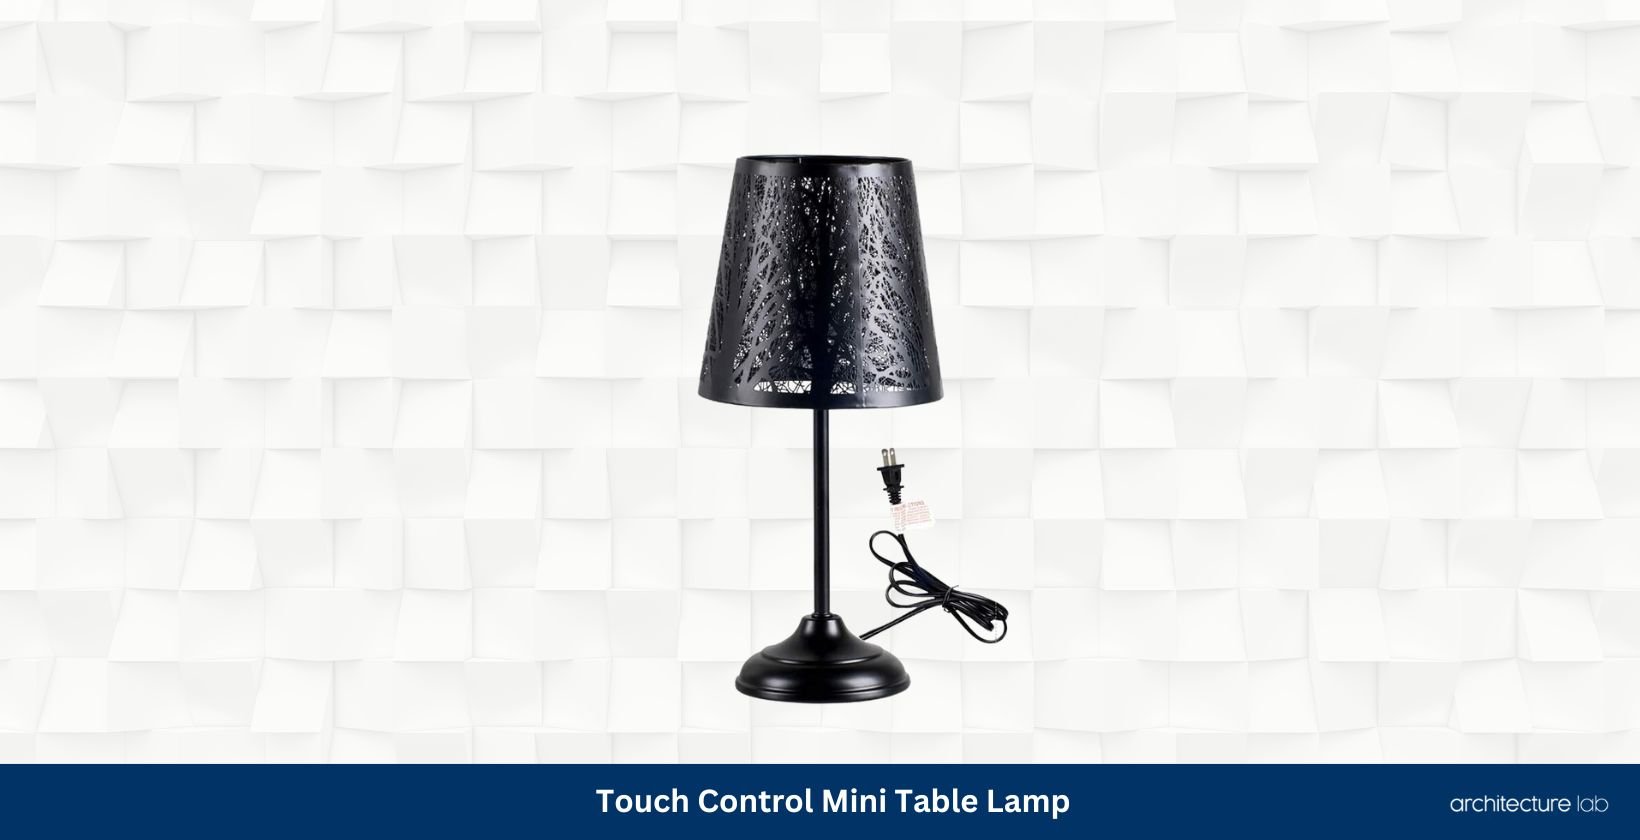 Touch control mini table lamp